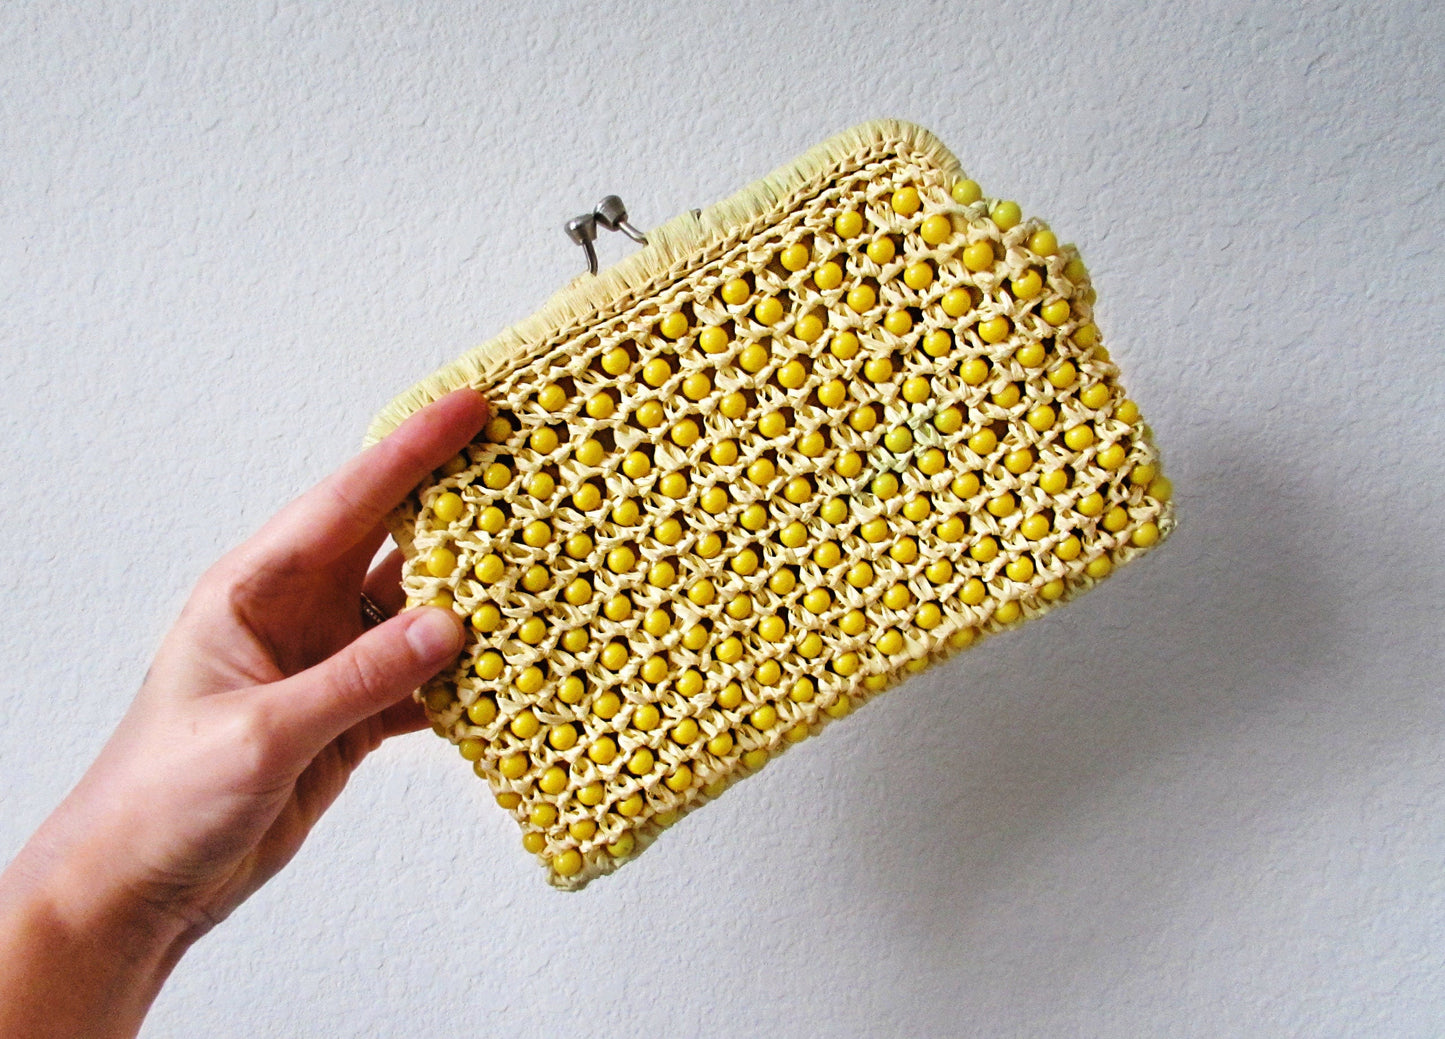 Vintage Yellow Handbag, '50s Clutch in Canary Yellow, Beaded Straw Kiss Lock Clutch with Retro Floral Cotton Lining, 1950s Fashion